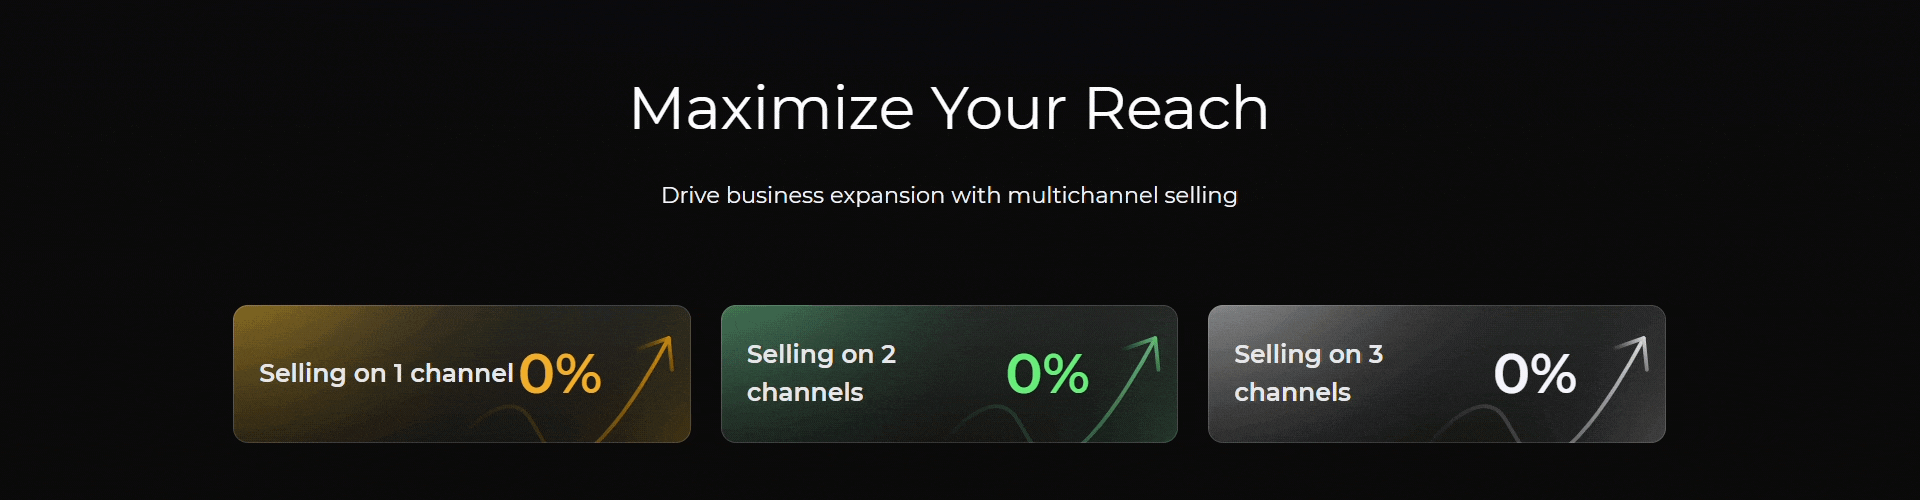 Maximize your reach with multichannel selling 